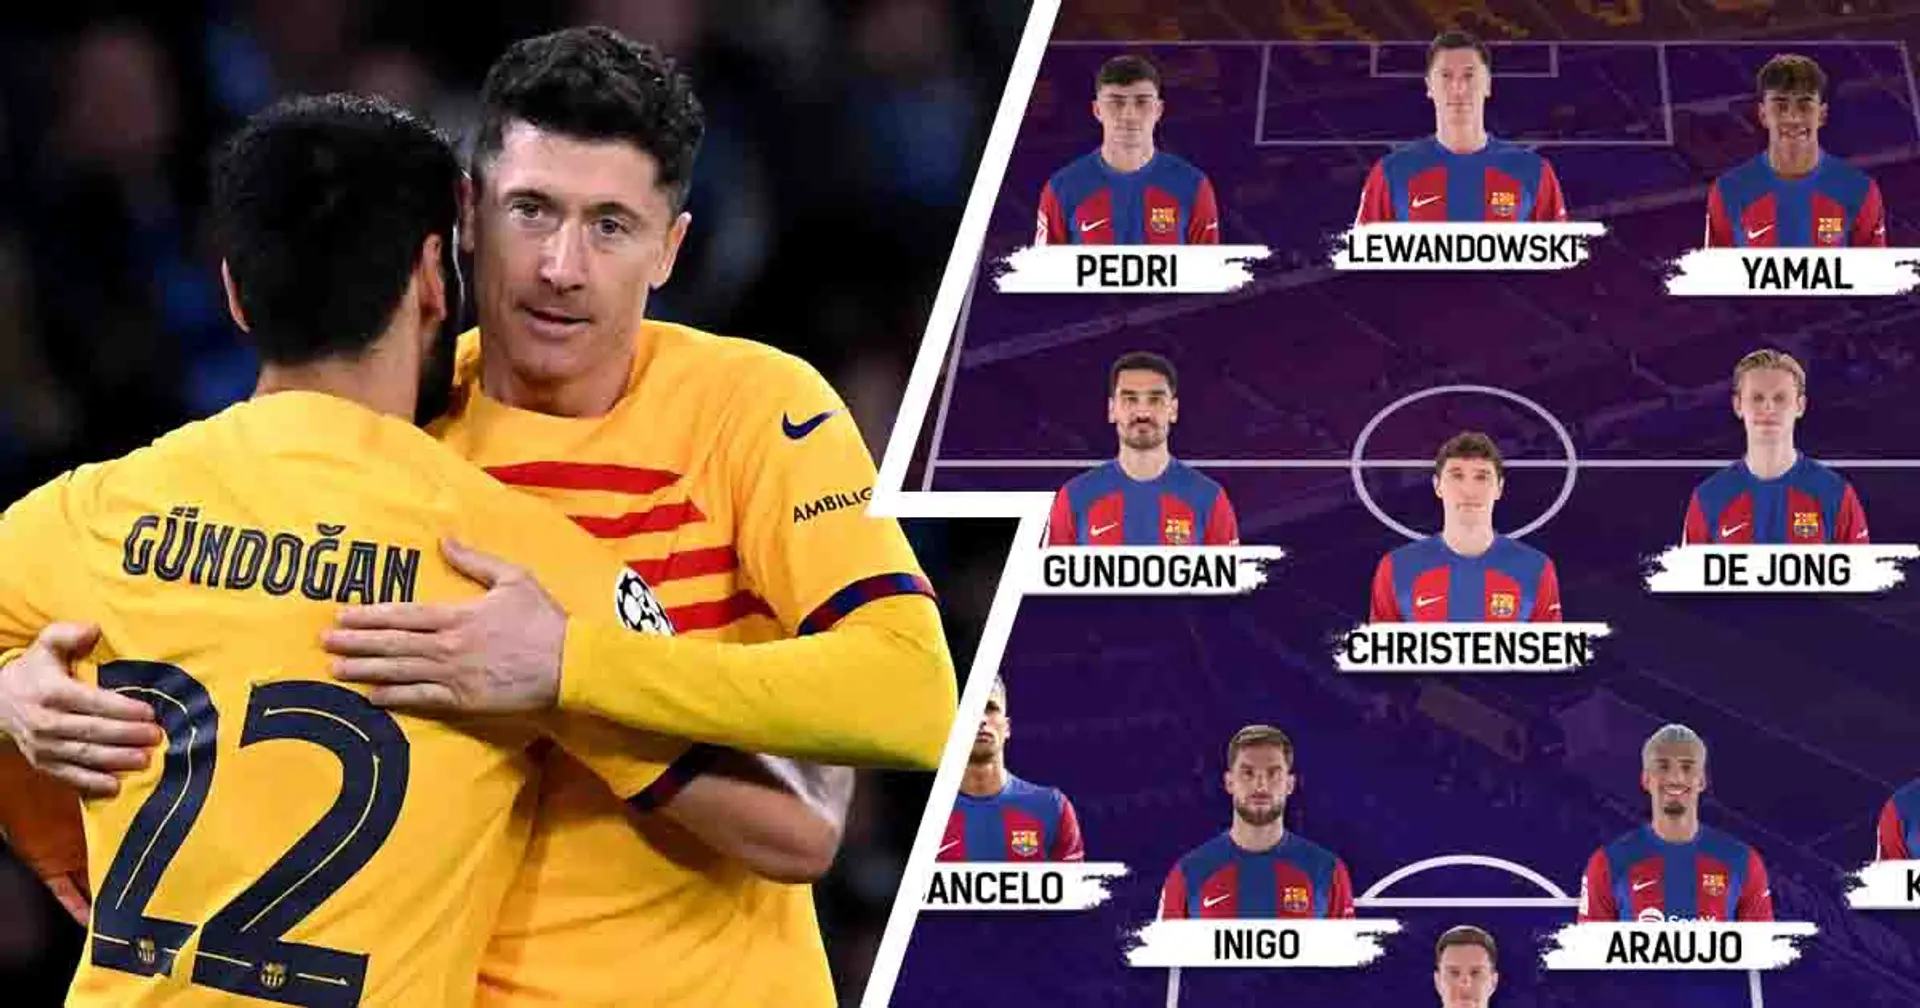 Barcelona's biggest strengths in Napoli draw shown - features three players